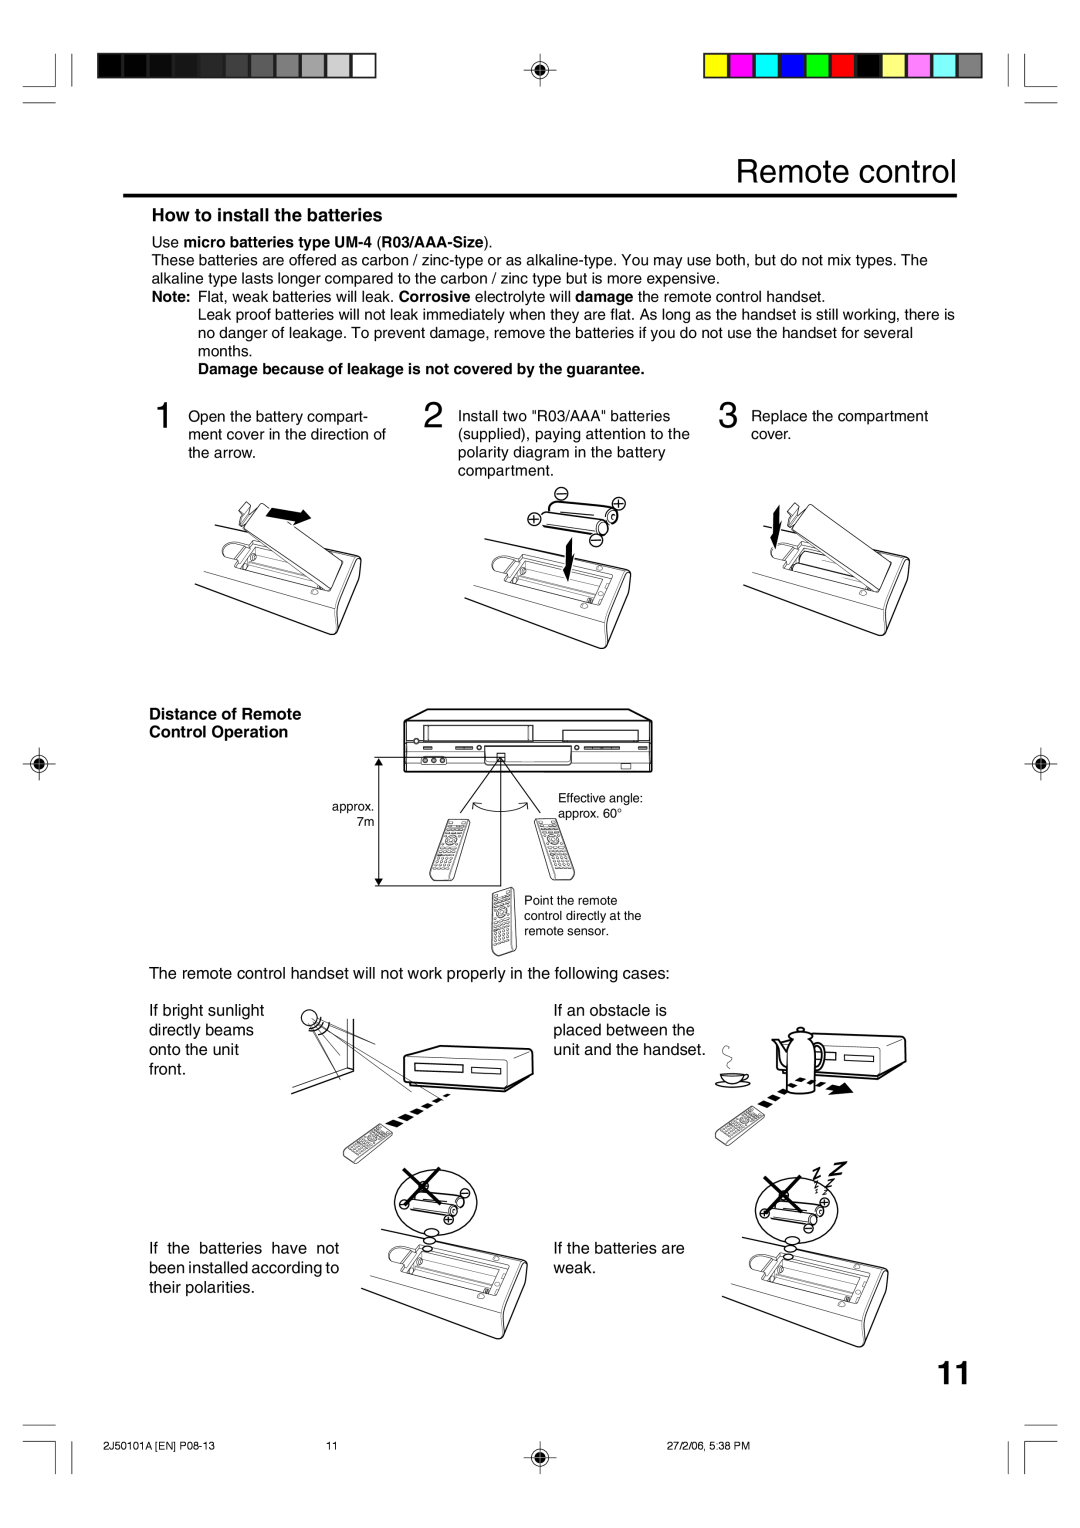 Toshiba SD-37VBSB manual Remote control, How to install the batteries, Distance of Remote Control Operation 